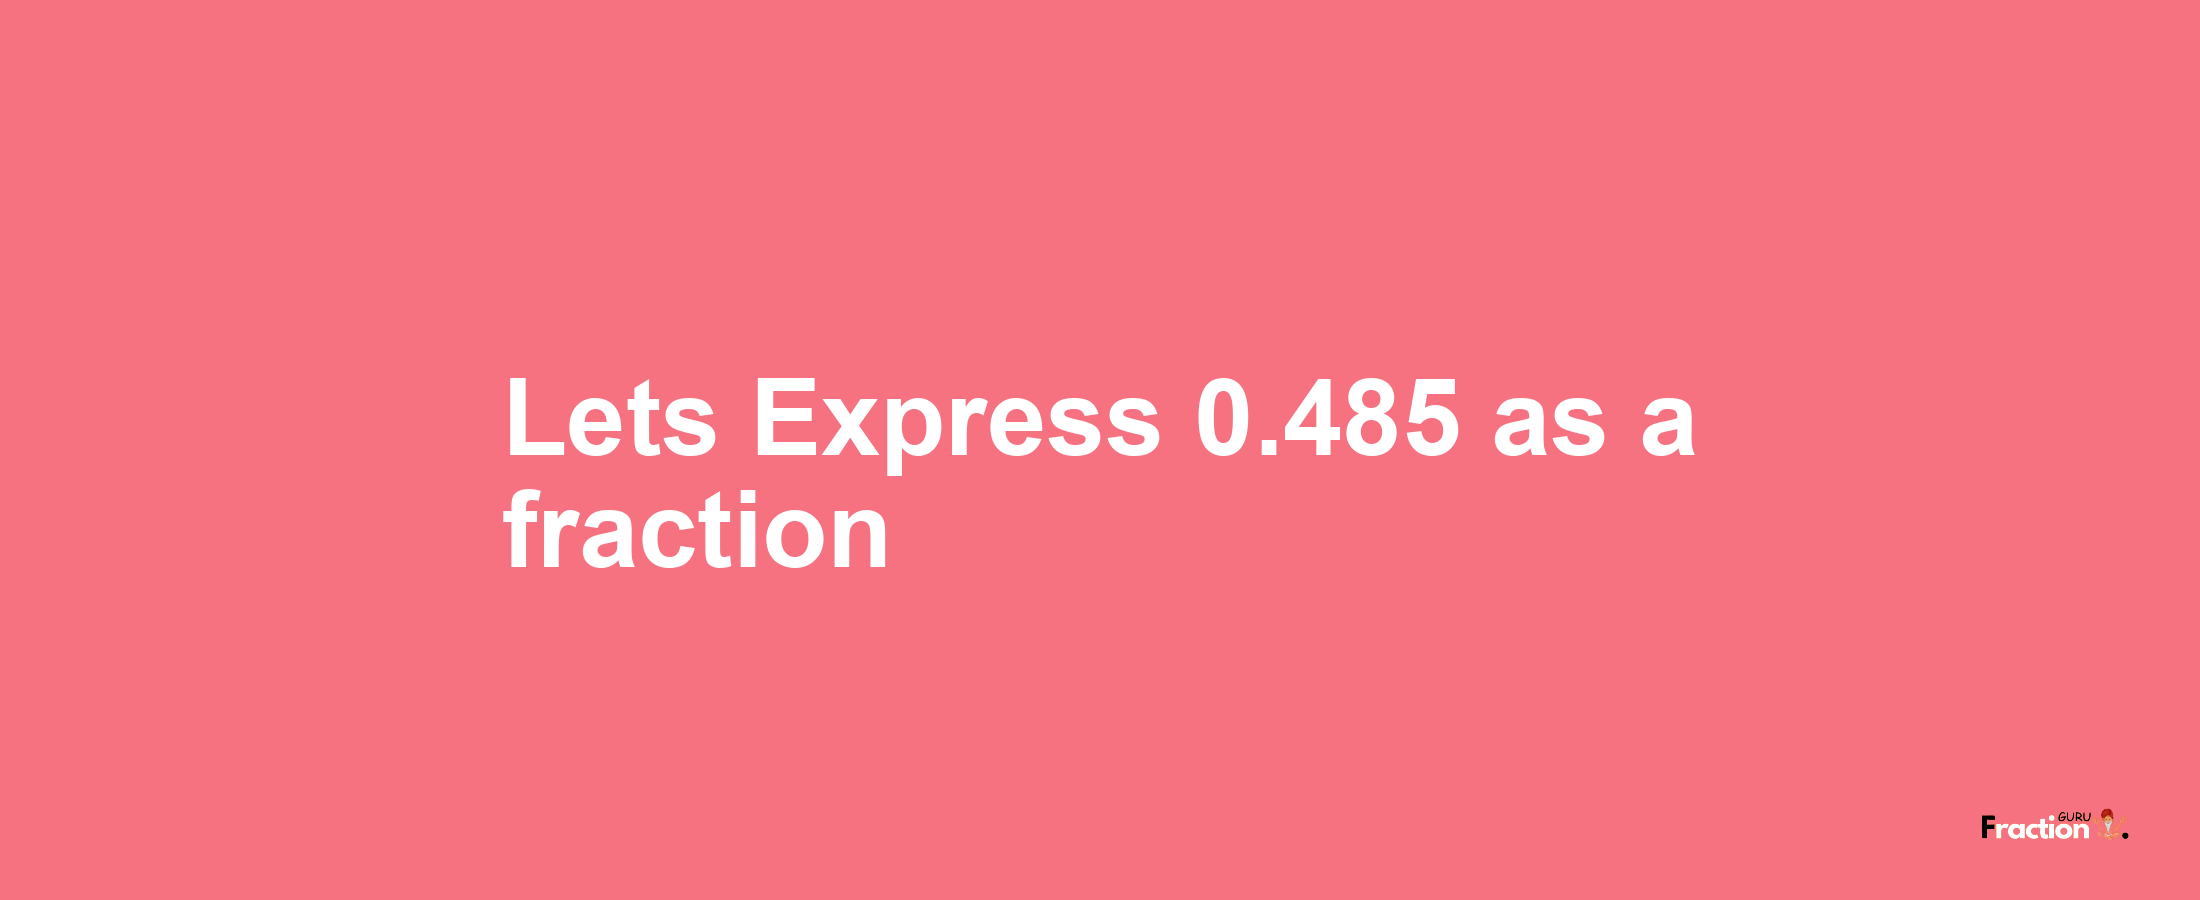 Lets Express 0.485 as afraction